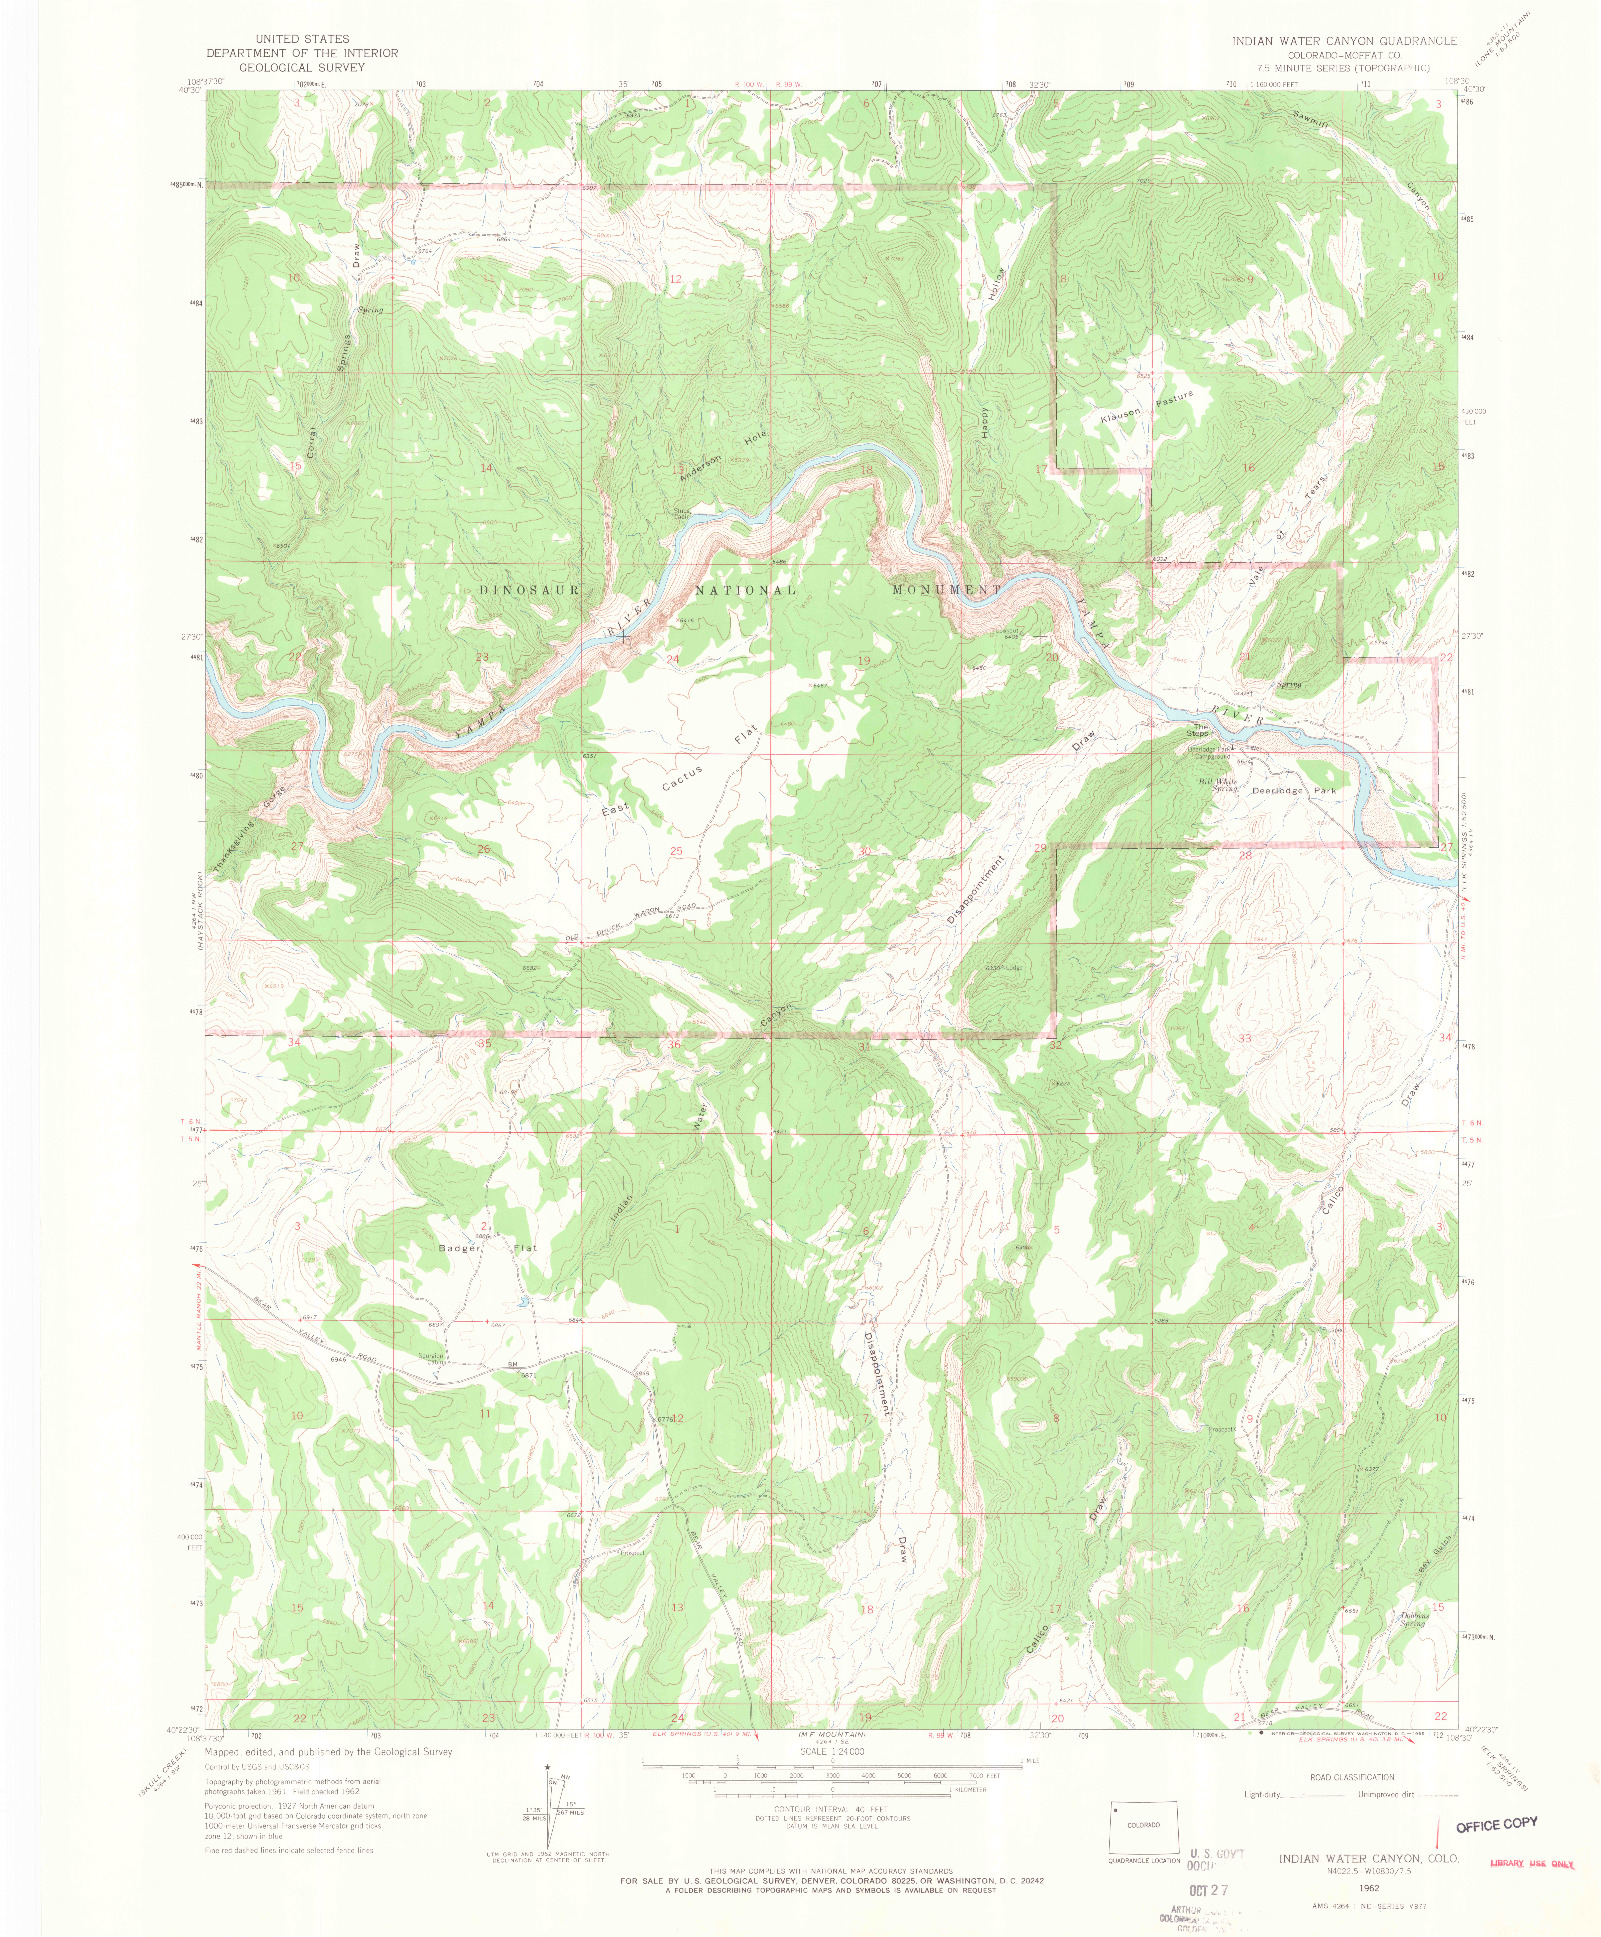 USGS 1:24000-SCALE QUADRANGLE FOR INDIAN WATER CANYON, CO 1962